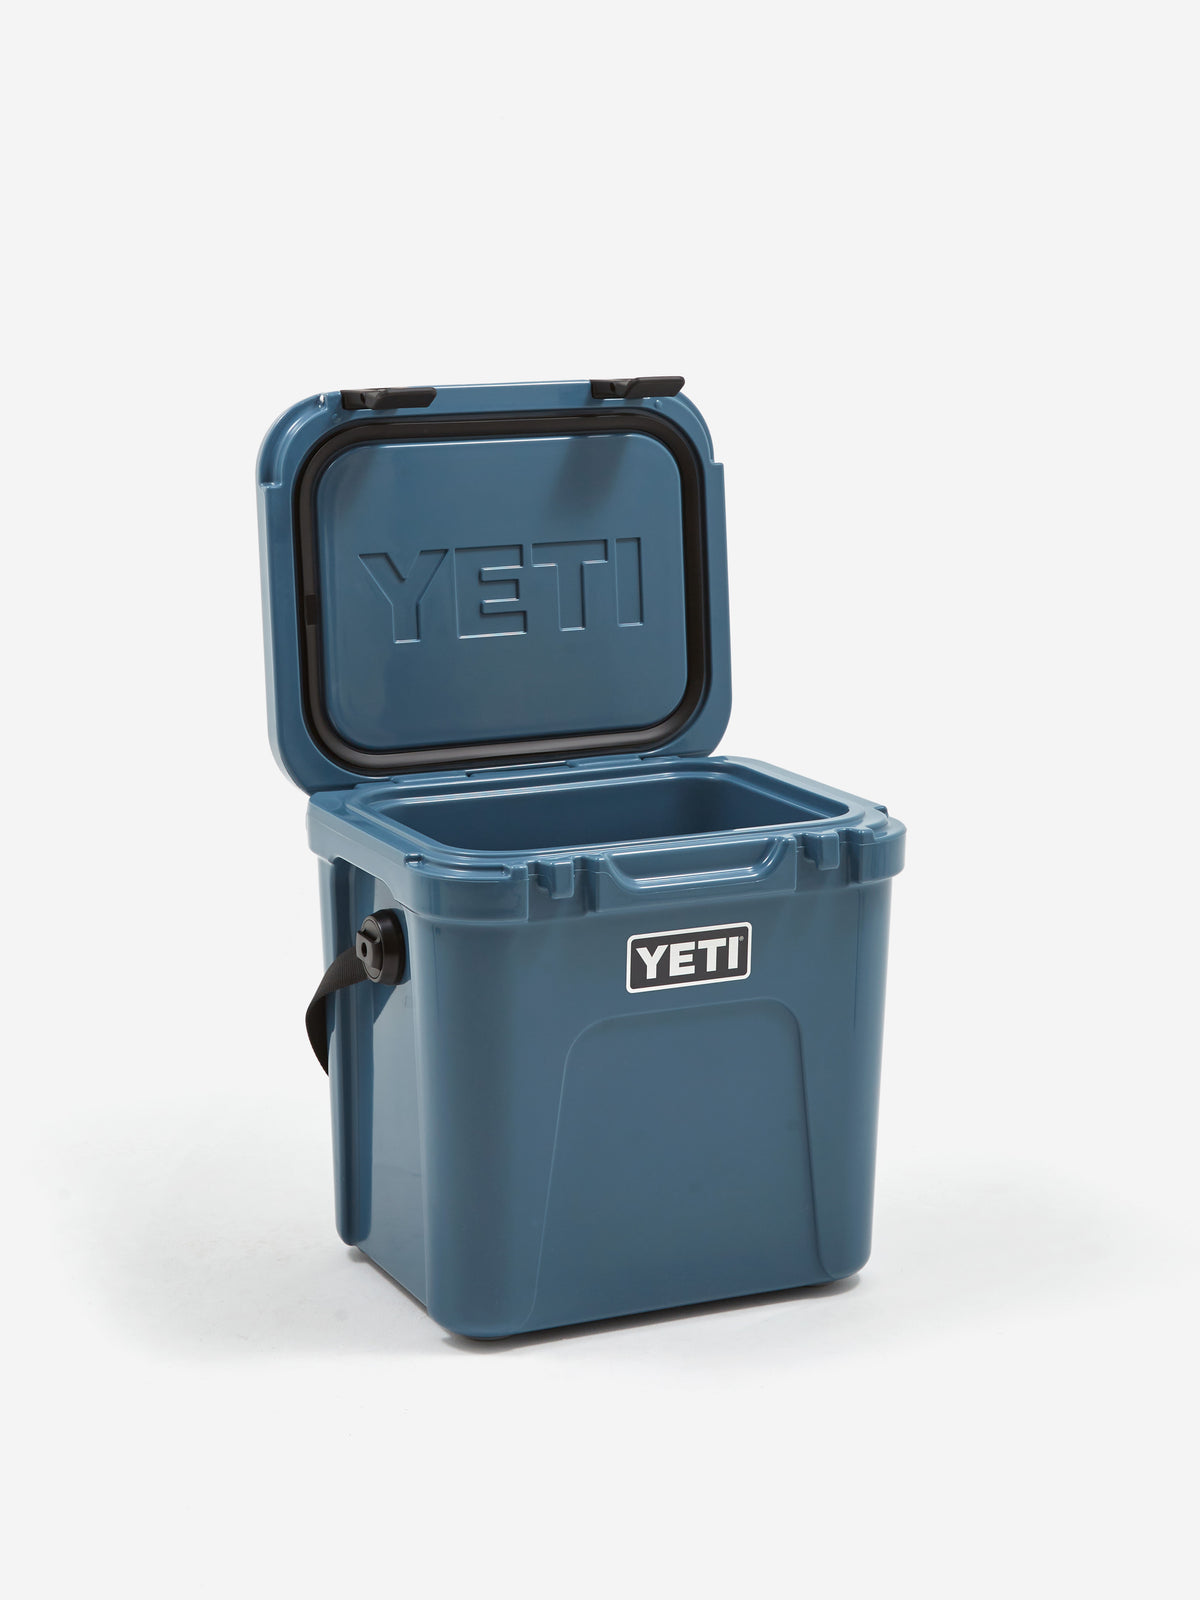 https://www.goodhoodstore.shop/wp-content/uploads/1692/13/find-great-online-shopping-at-affordable-prices-using-yeti-roadie-24-nordic-blue-yeti_4.jpg